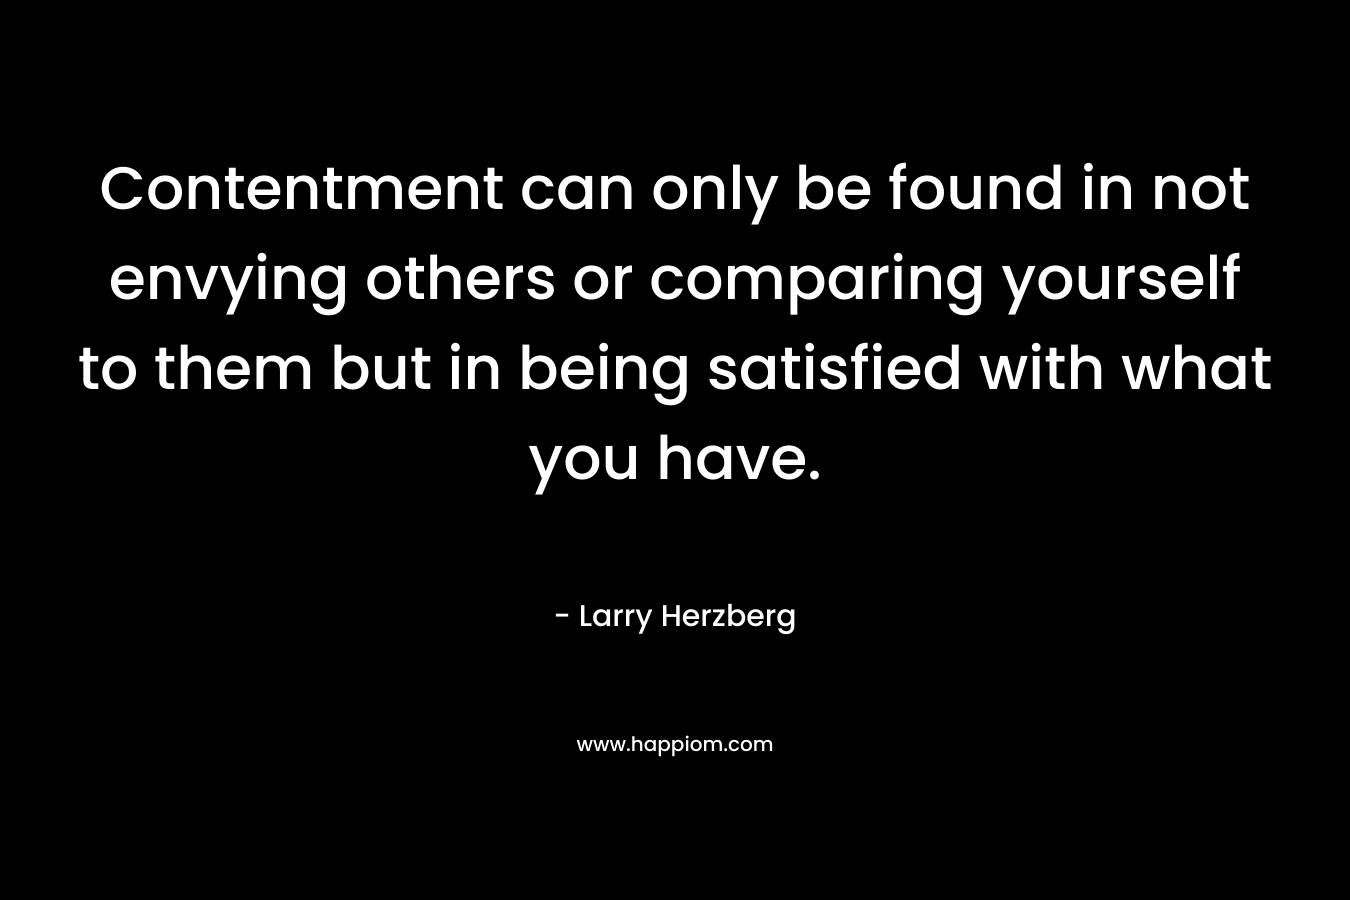 Contentment can only be found in not envying others or comparing yourself to them but in being satisfied with what you have. – Larry Herzberg